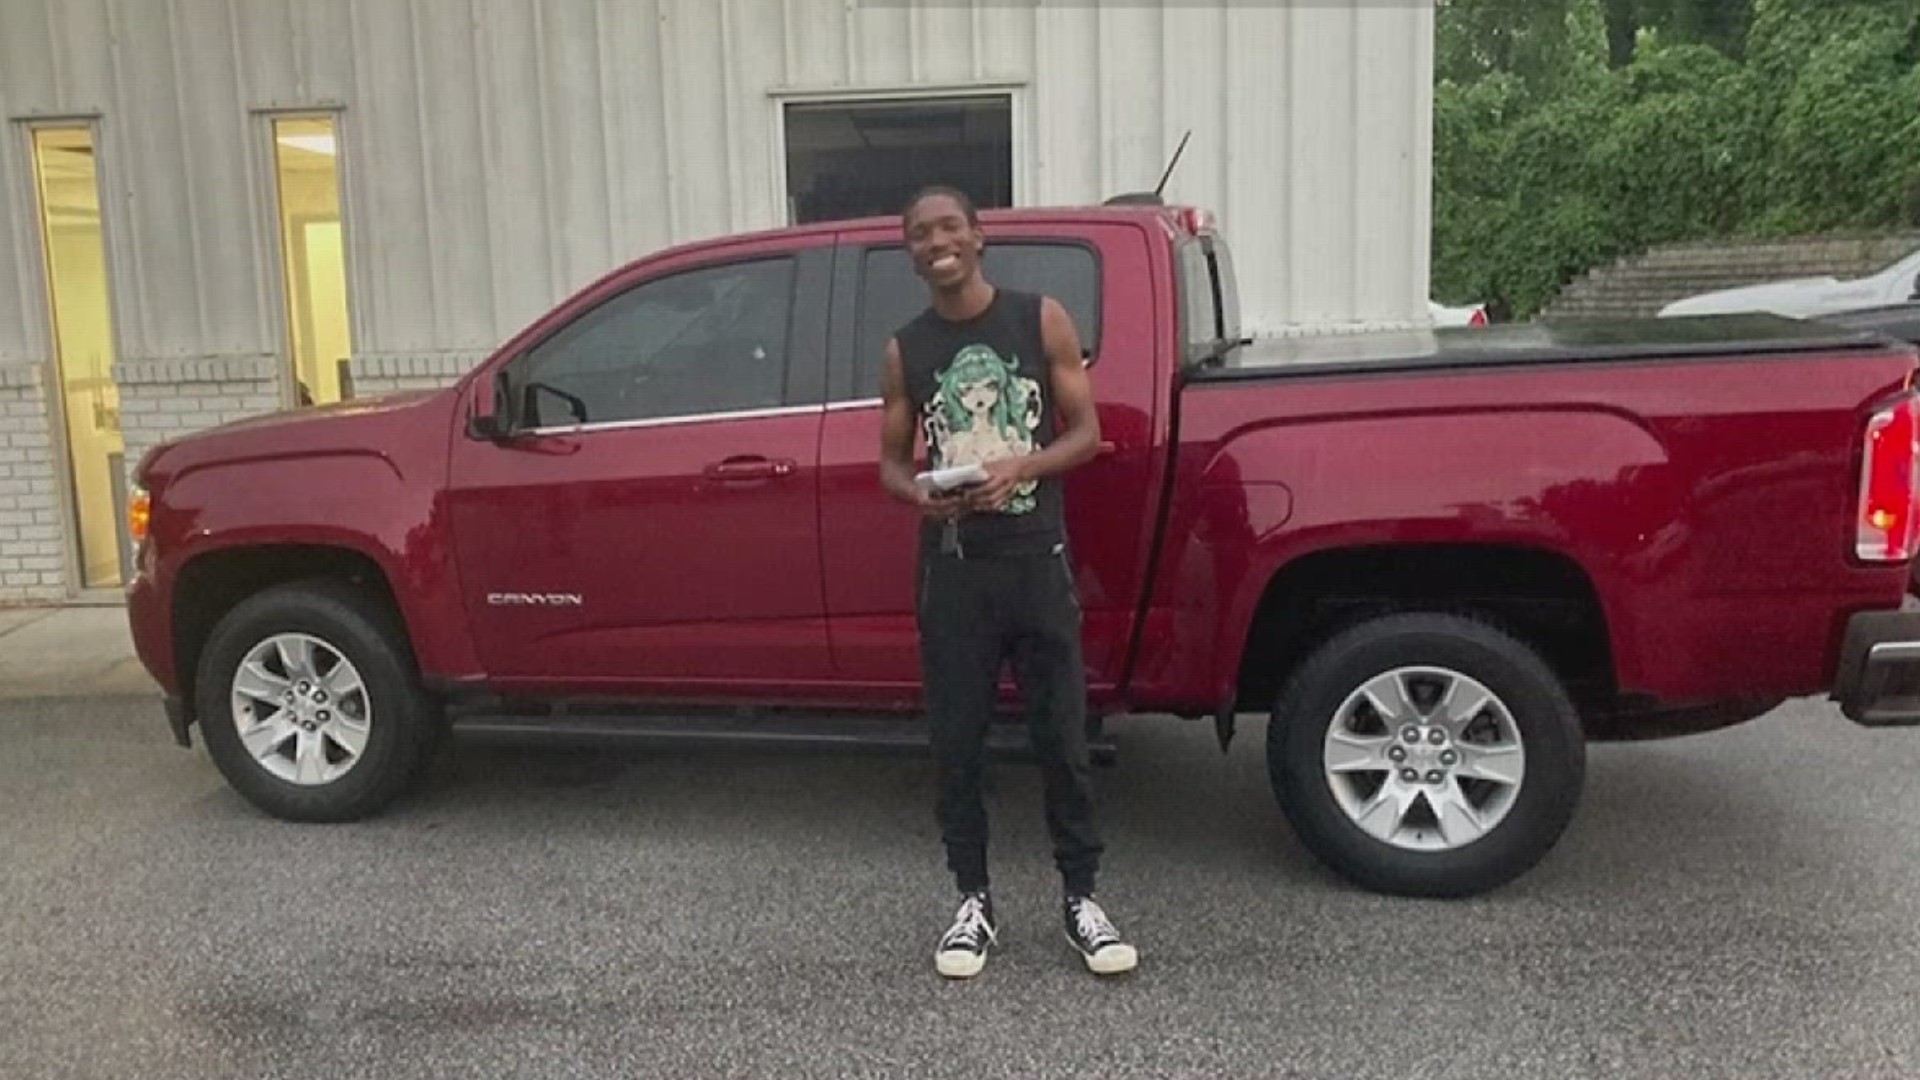 Leondre Flynt went missing on July 29 after he told family he left for a trip to pick up car parts at the auto shop.